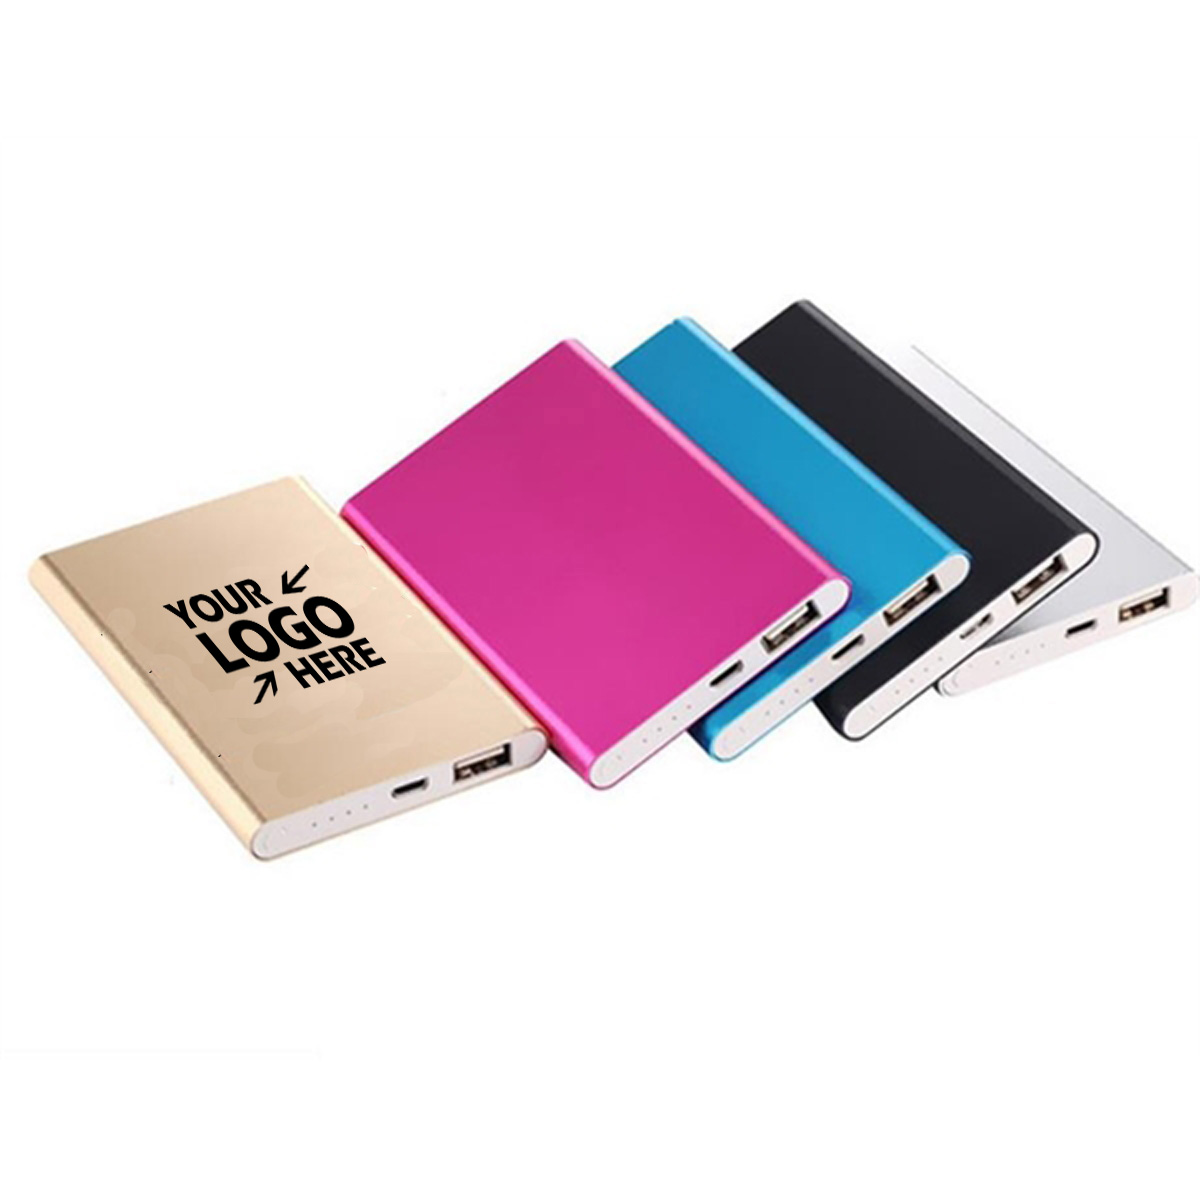 GL-EXT1008 Ultra Thin Mobile Power Bank